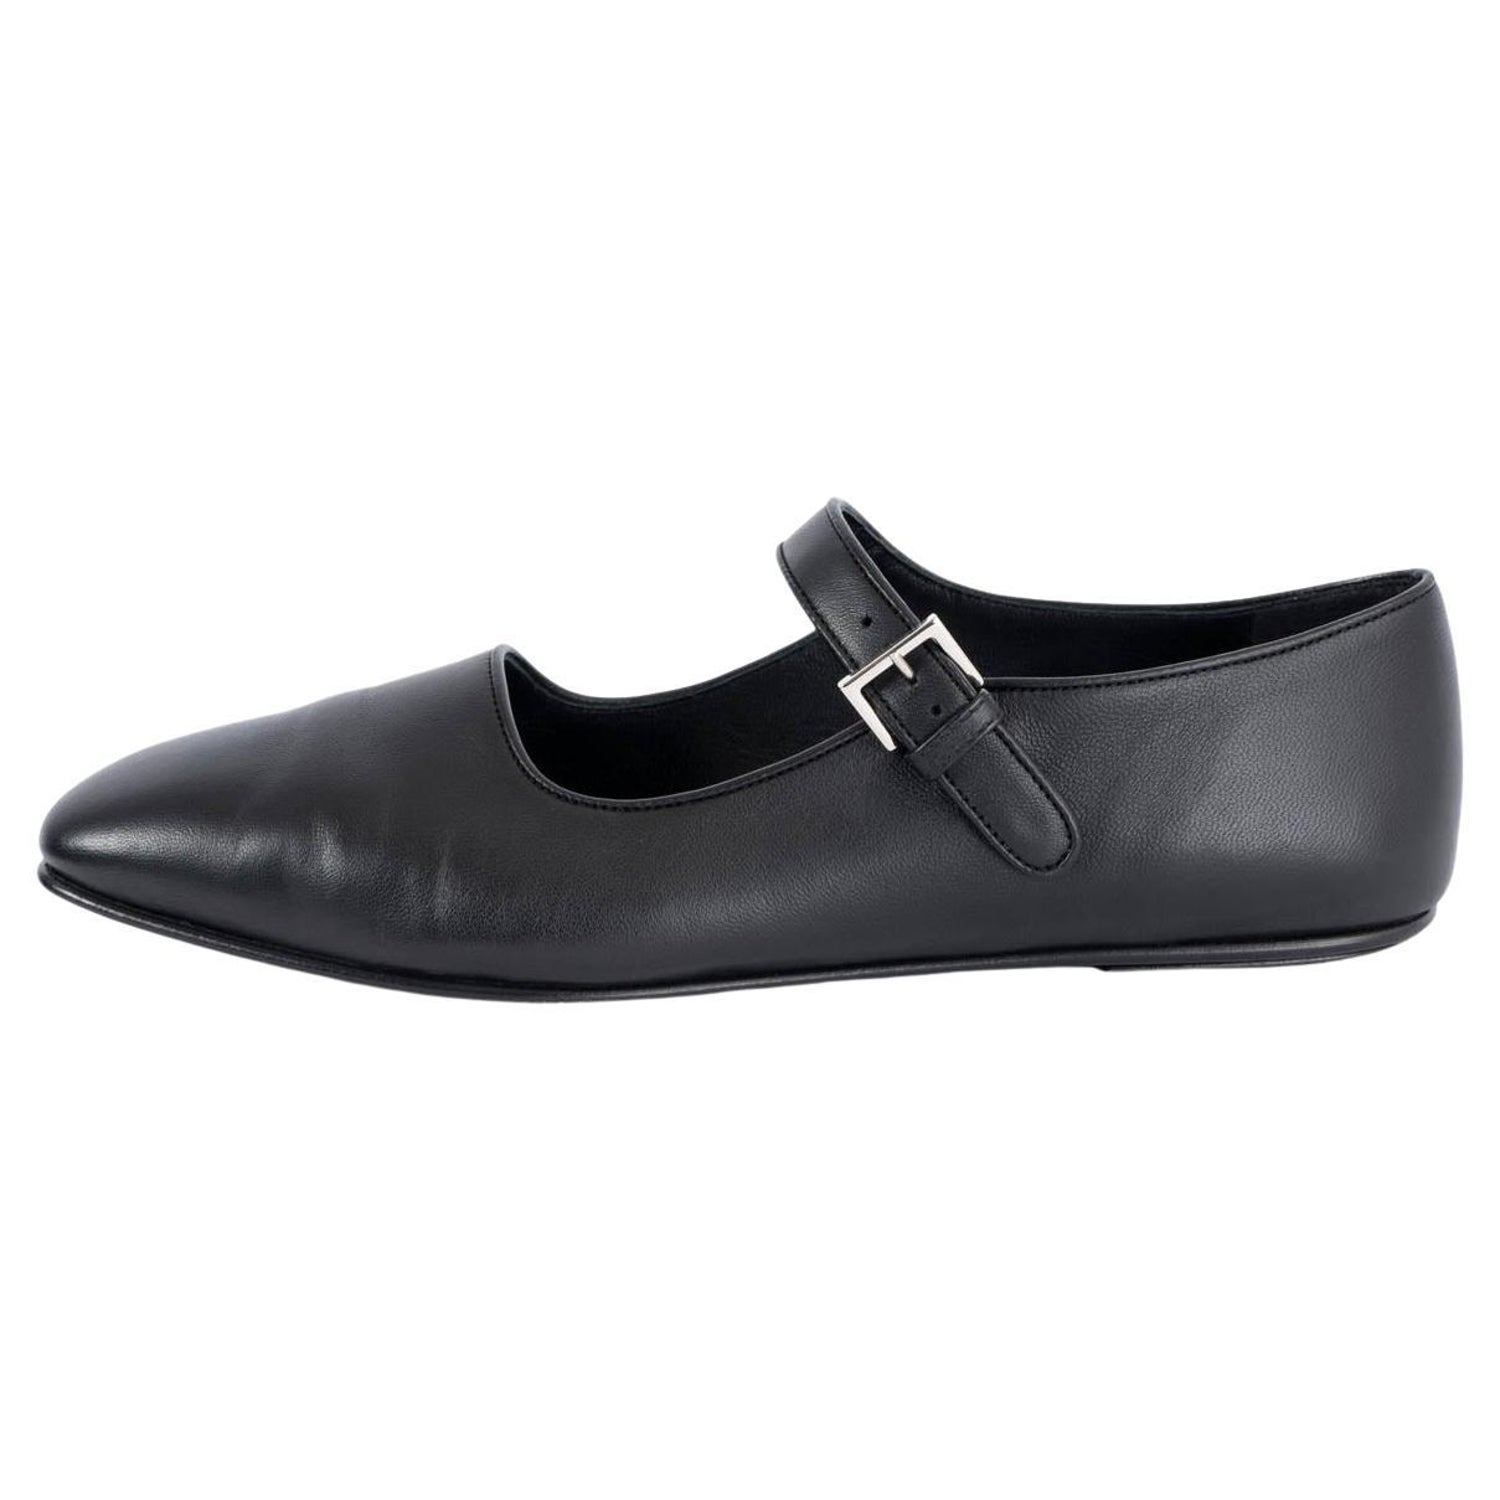 Mary Janes Flats -18 For Sale on 1stDibs  leather mary jane flats, black  mary jane flats, mary jane shoes flats